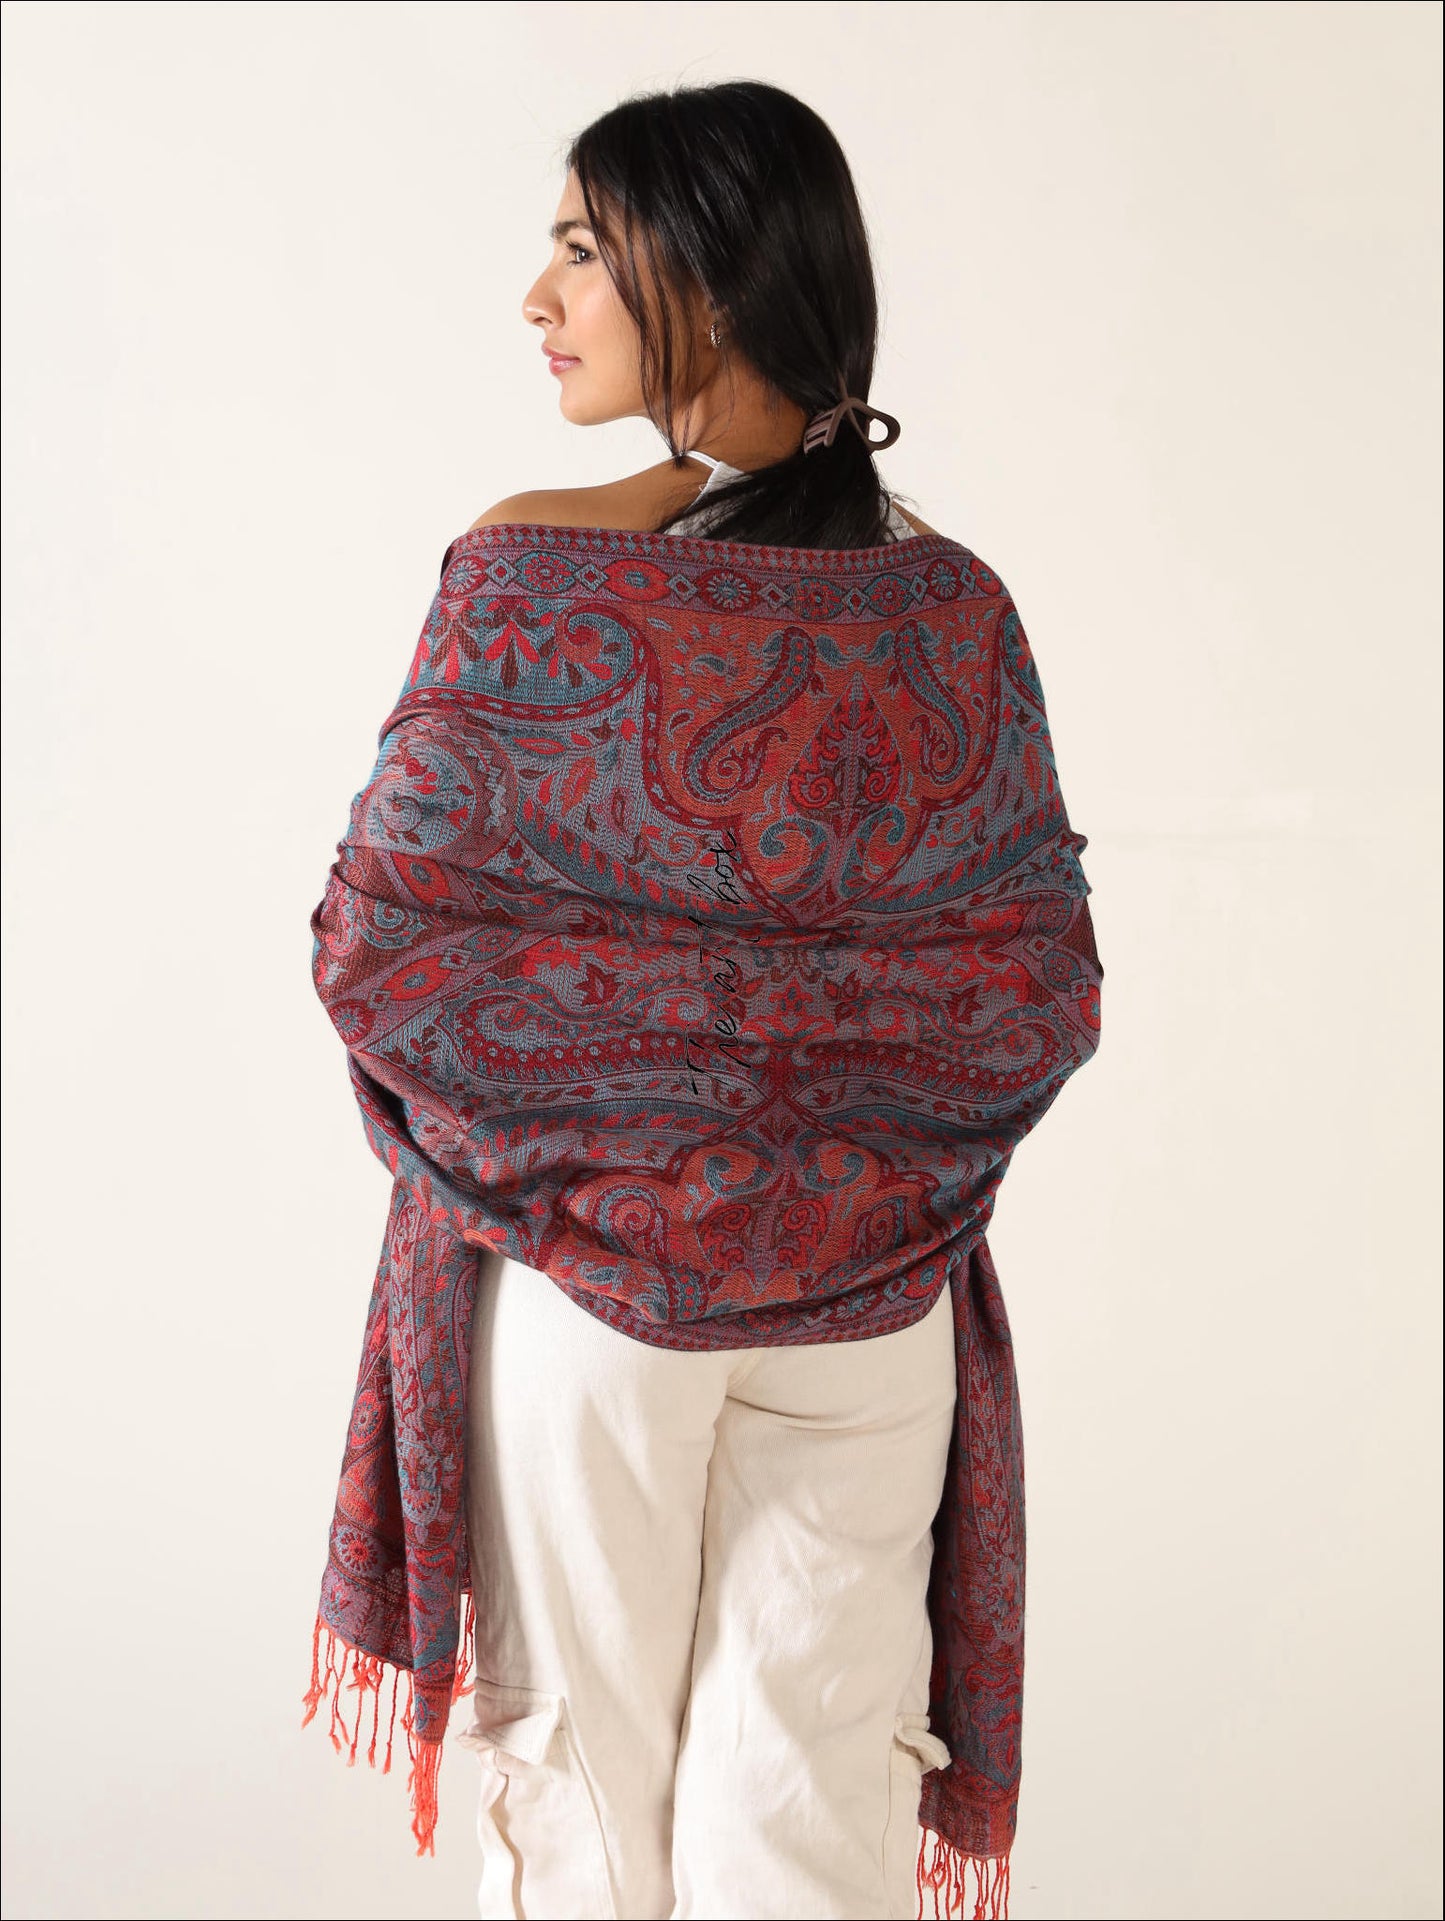 Chic and Versatile: Cashmere Feel Pashmina Scarf for Stylish Evenings